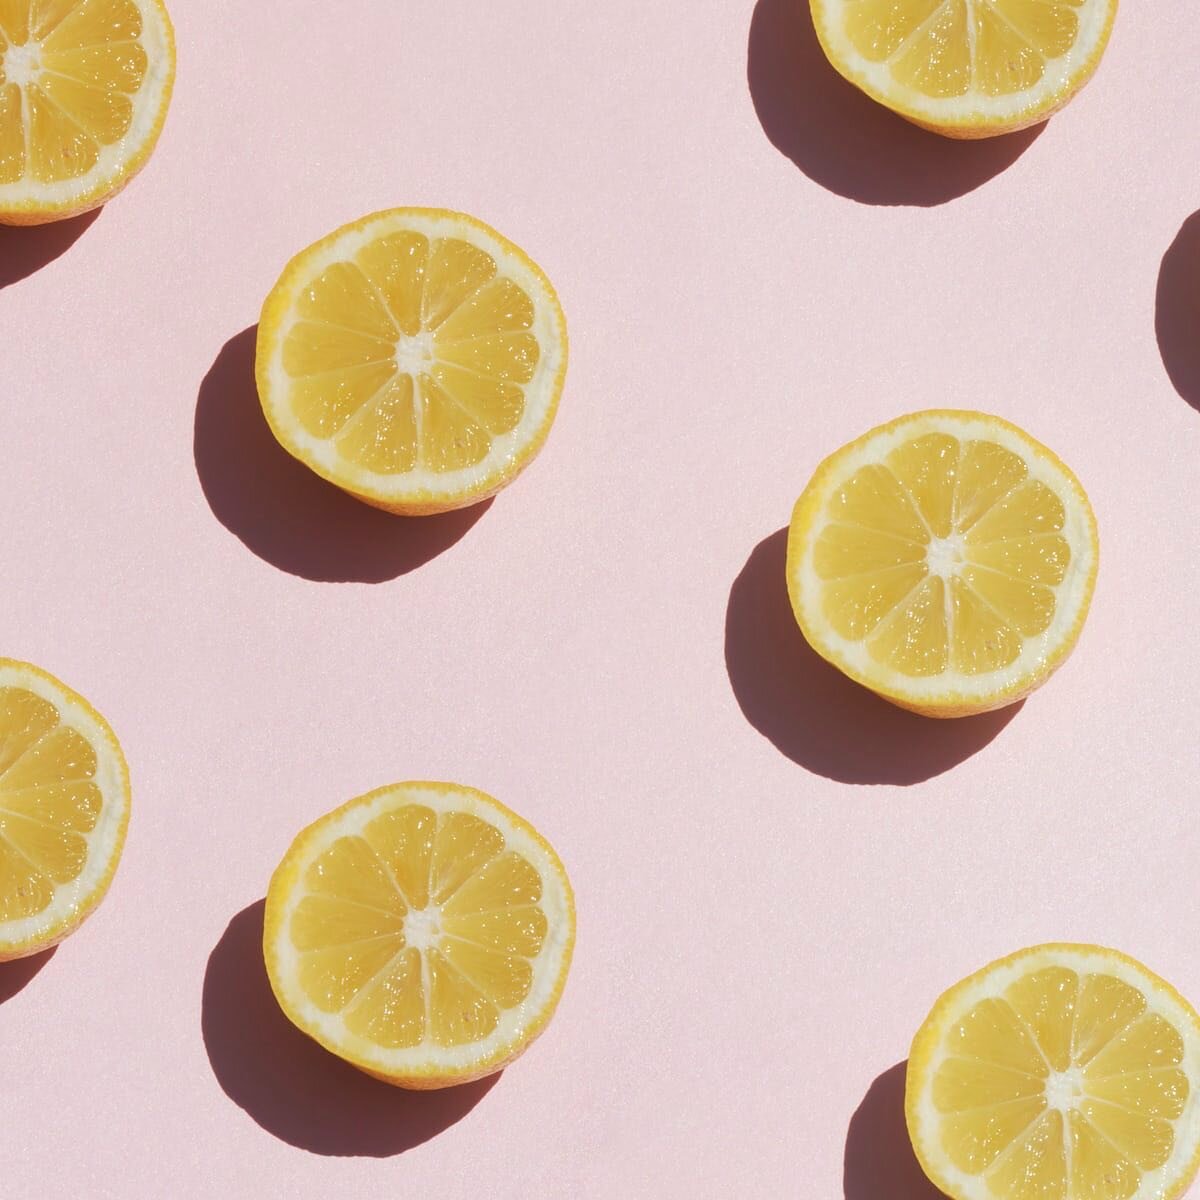 S P R I N G 🍋 D E T O X

Tomorrow (Monday 5th September) we start a gentle detox over on the Movement Membership 💛

This includes:
🍋Varied movement practices 
🍋Meditation and breath practices 
🍋Dietary guidance
🍋Reduce/eliminate caffeine &amp; 